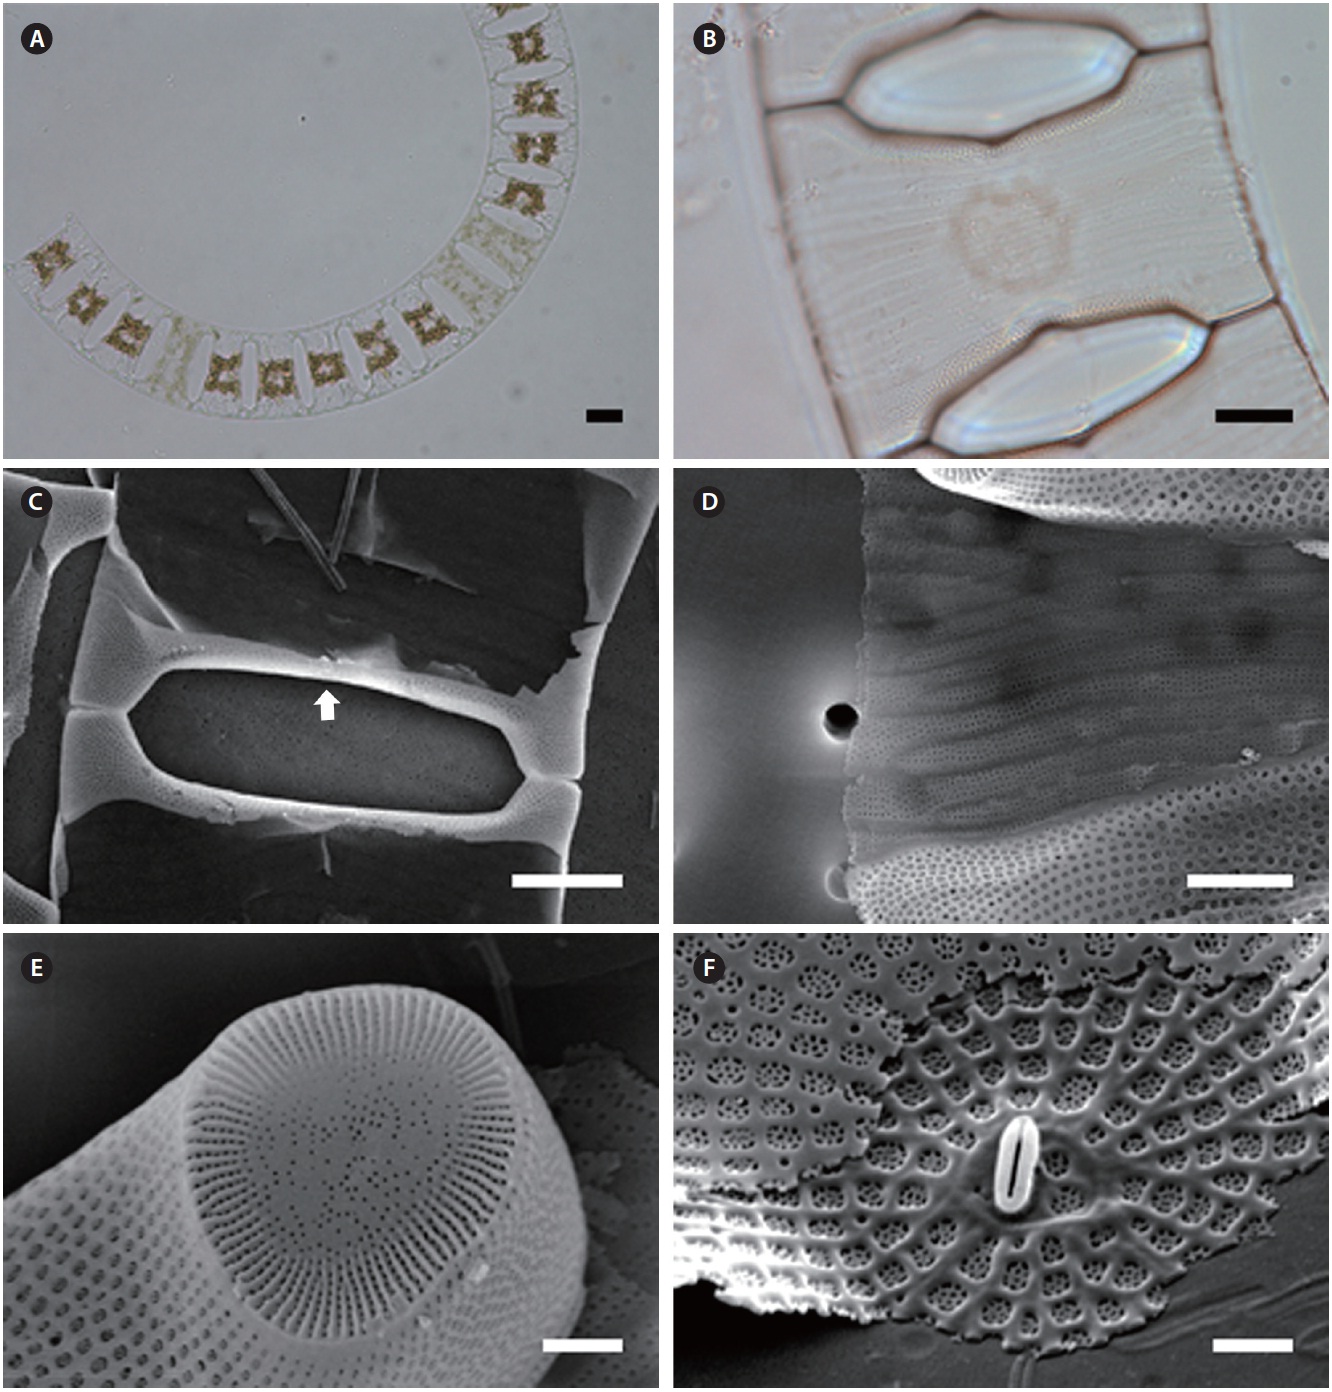 Eucampia zodiacus. (A) Colony formation, light microscopy (LM). (B) Partial colony, narrow and rounded rectangular aperture shape, LM. (C) Short and broad elevations with risen blunt tips, labiate process (arrow) on the internal valve center, scanning electron microscopy (SEM). (D) Intercalary bands with rows of puncta, SEM. (E) Ocellus with radial ribs and large central area, SEM. (F) Labiate process, SEM. Scale bars represent: A, 20 μm; B, 10 μm; C, 5 μm; D-F, 1 μm.